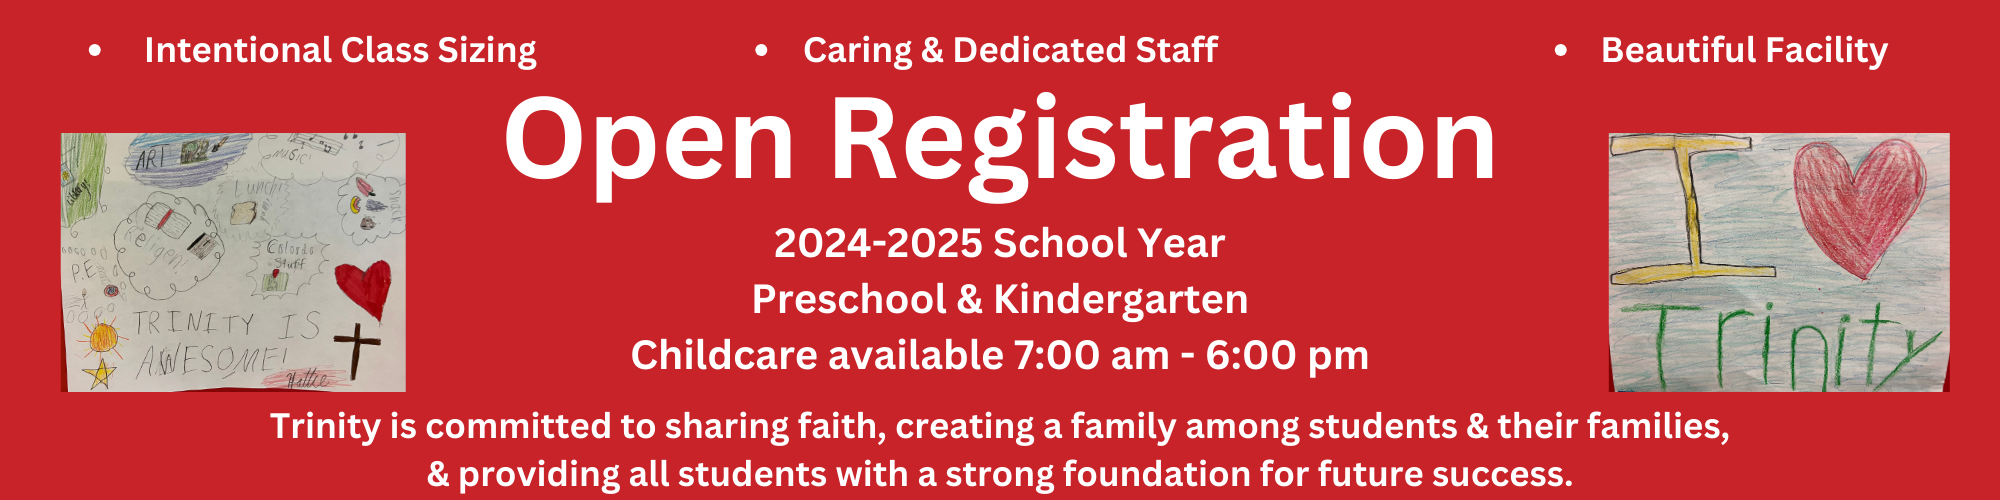 Early Registration - January 26-February 23 - 2024-2025 School Year - Preschool & Kindergarten - Trinity is committed to sharing faith, creating a family among students & their families & providing all students with a strong foundation